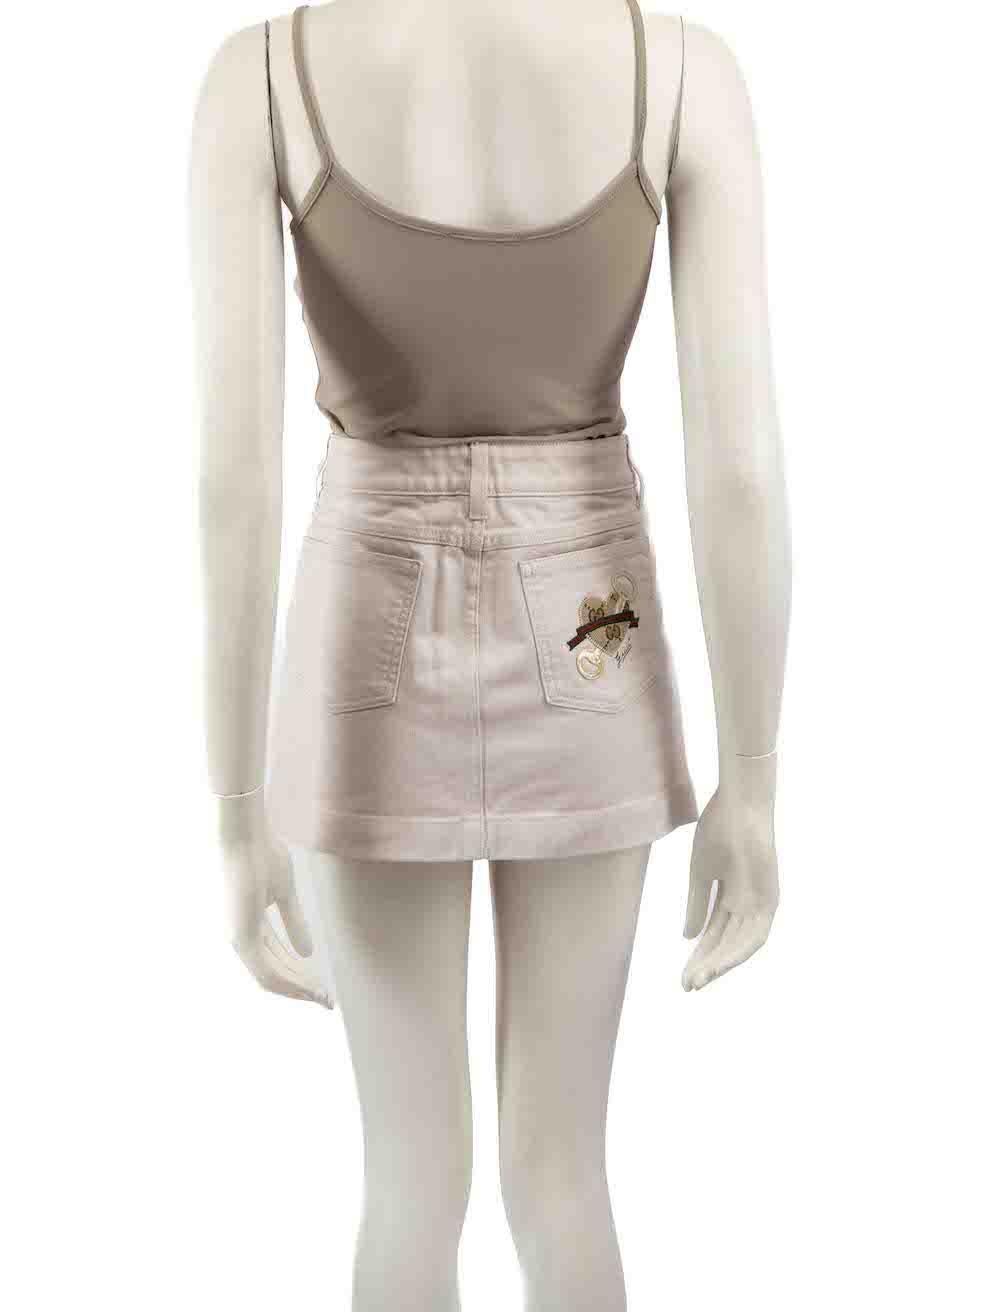 Gucci Beige Horsebit Heart Detail Mini Skirt Size M In Good Condition For Sale In London, GB